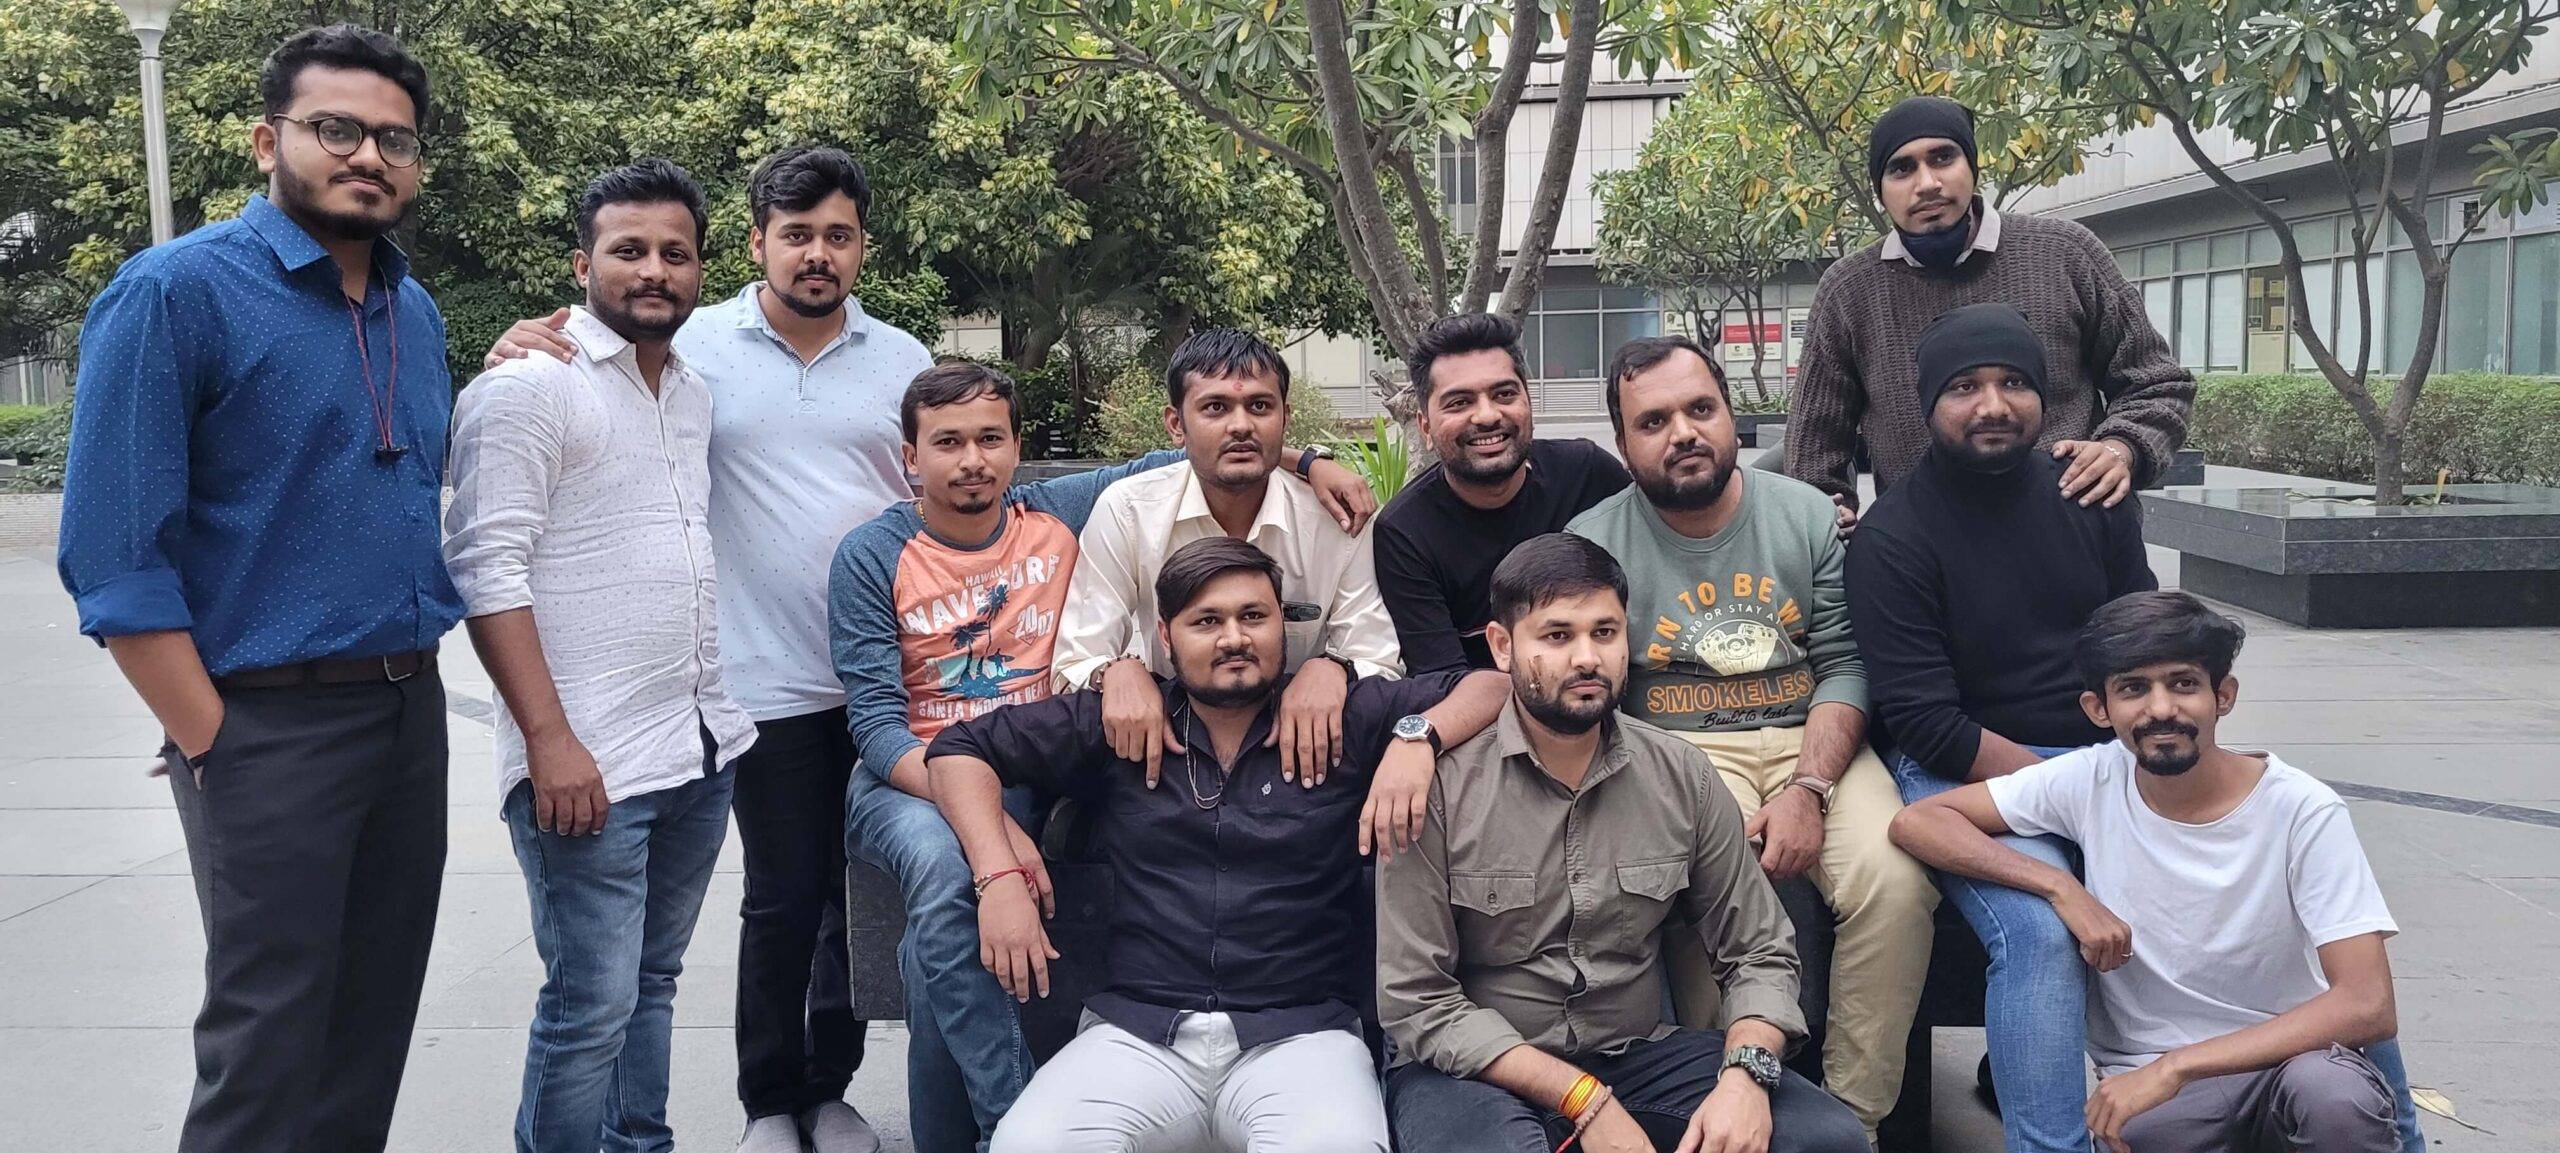 We celebrated International Men's Day with enthusiasm and joy. Silicon IT Hub celebrates all major festivals throughout the year.